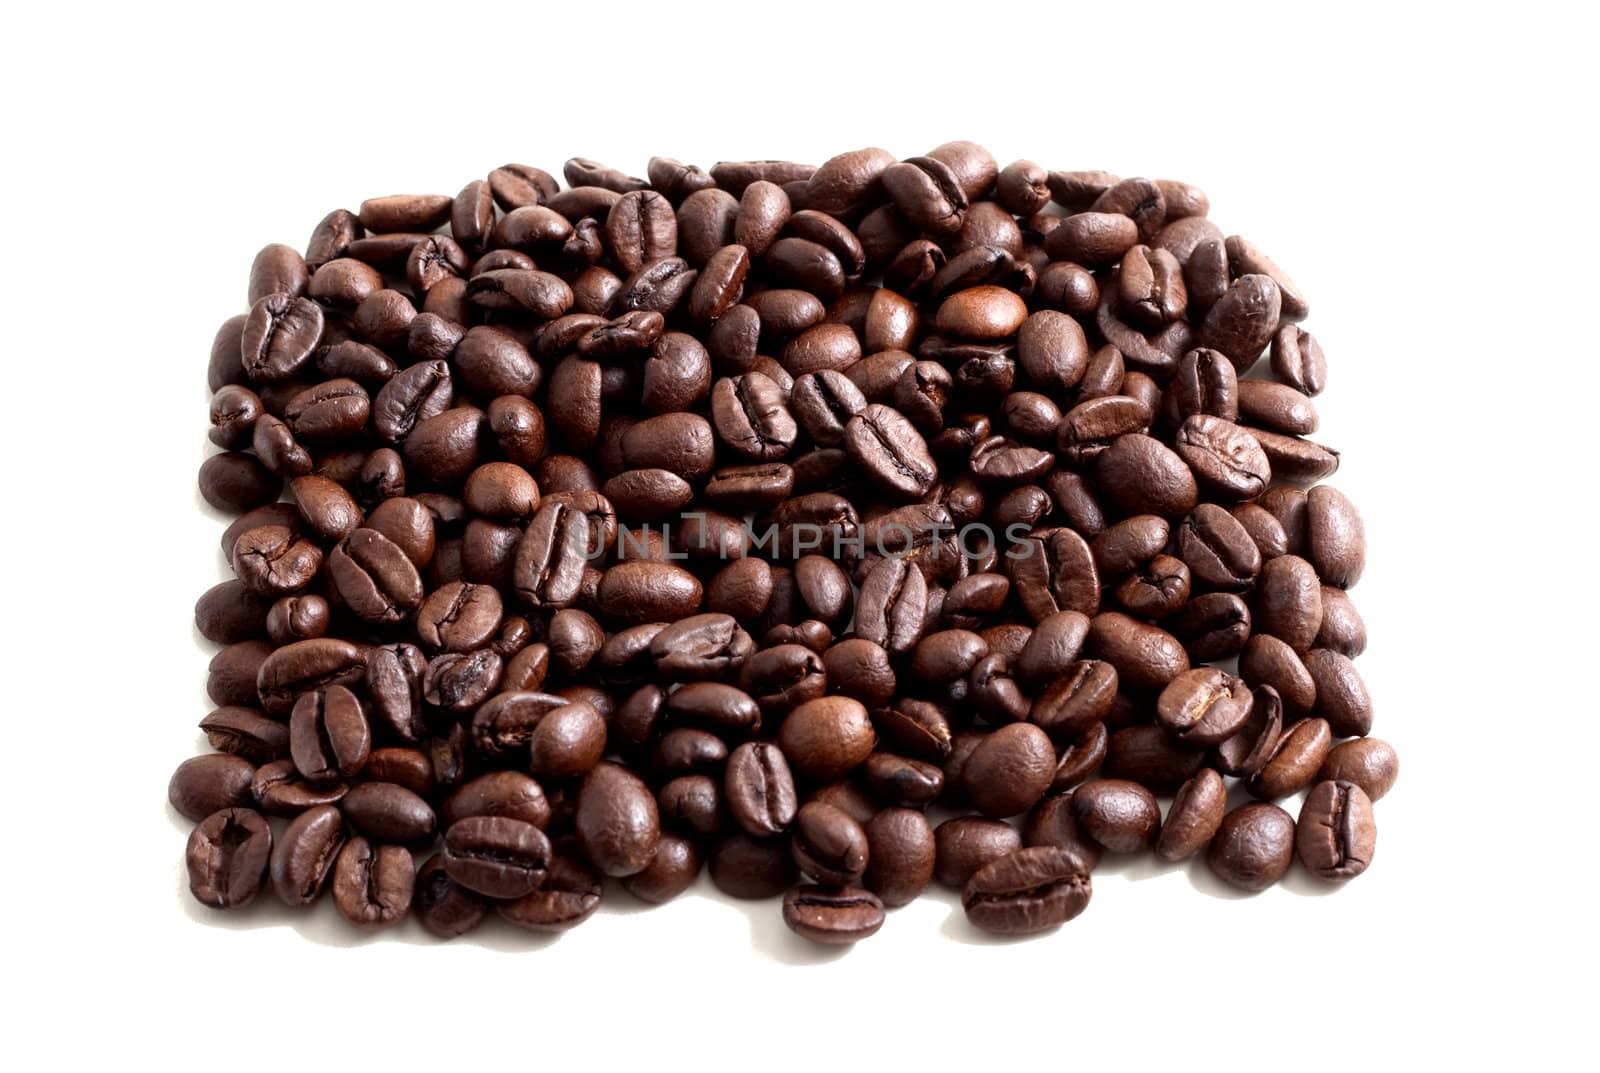 Coffee Beans by azschach